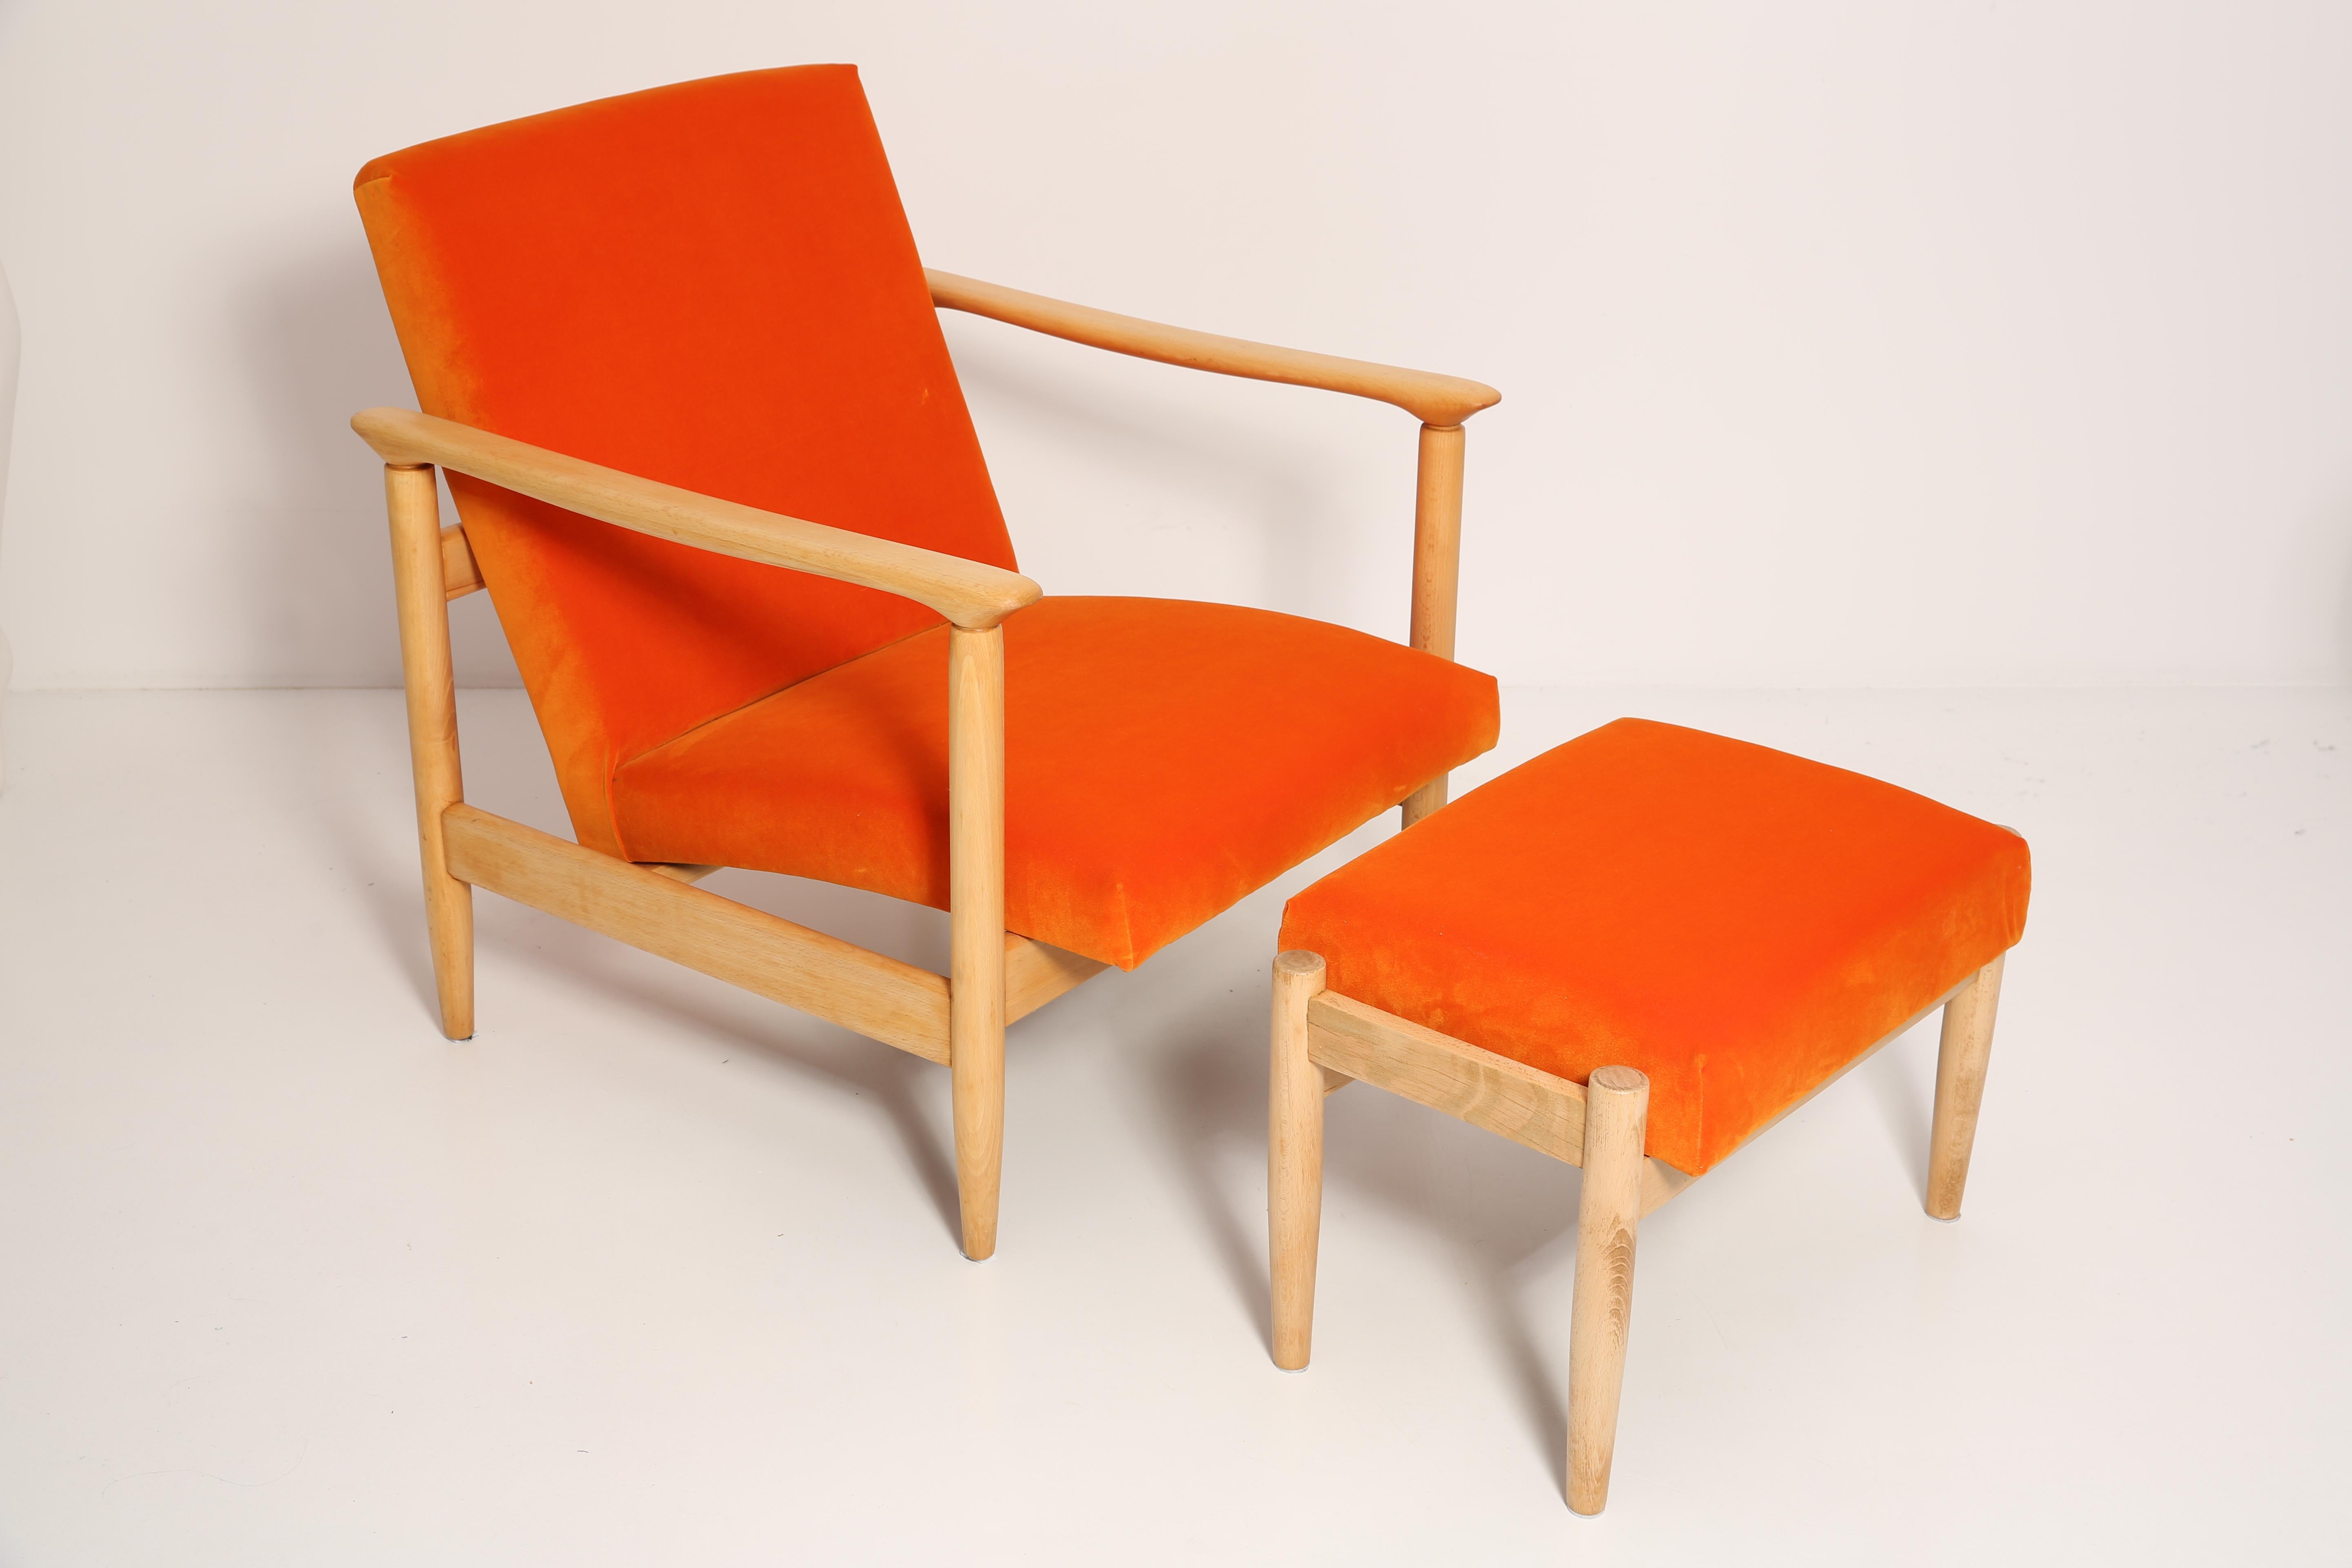 Beautiful bright orange velvet Armchairs GFM-142 and stools, designed by Edmund Homa, a polish architect, designer of Industrial Design and interior architecture, professor at the Academy of Fine Arts in Gdansk. 

The armchairs was made in the